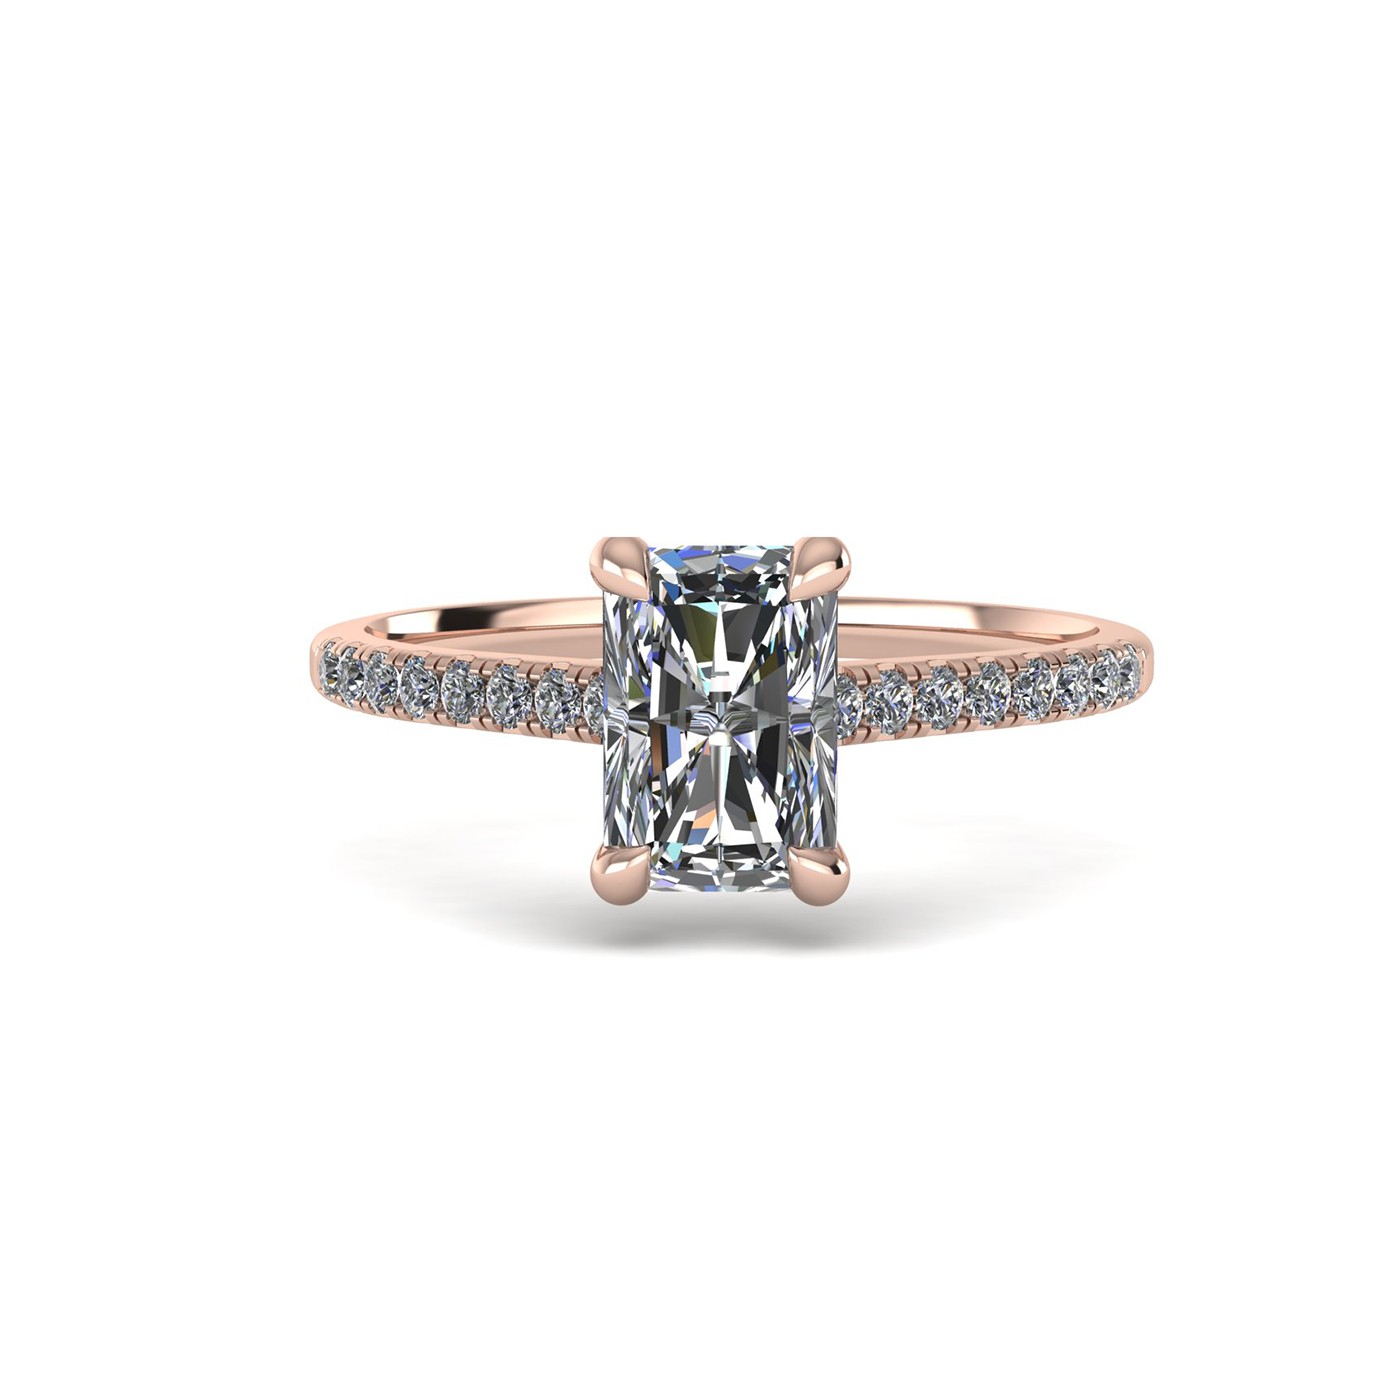 18k rose gold  1,00 ct 4 prongs radiant cut diamond engagement ring with whisper thin pavÉ set band